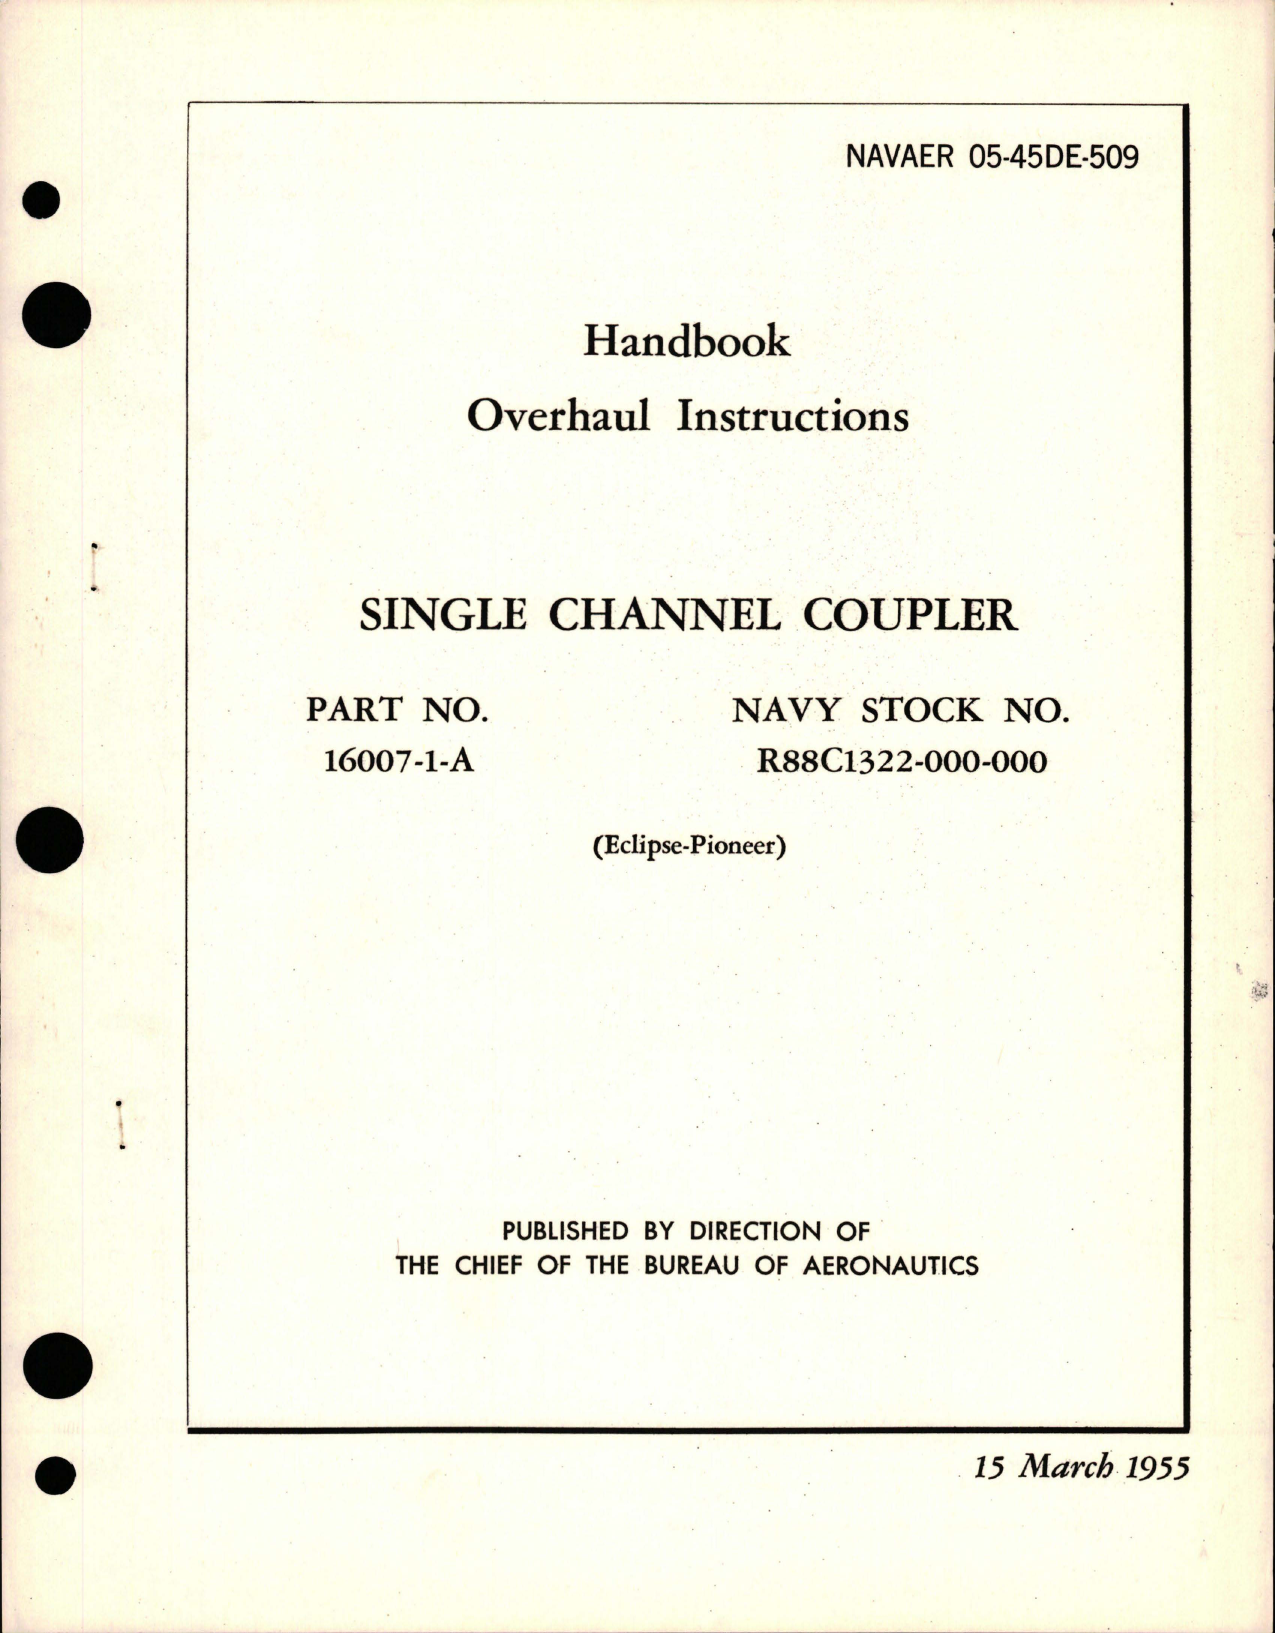 Sample page 1 from AirCorps Library document: Overhaul Instructions for Single Channel Coupler - Part 16007-1-A